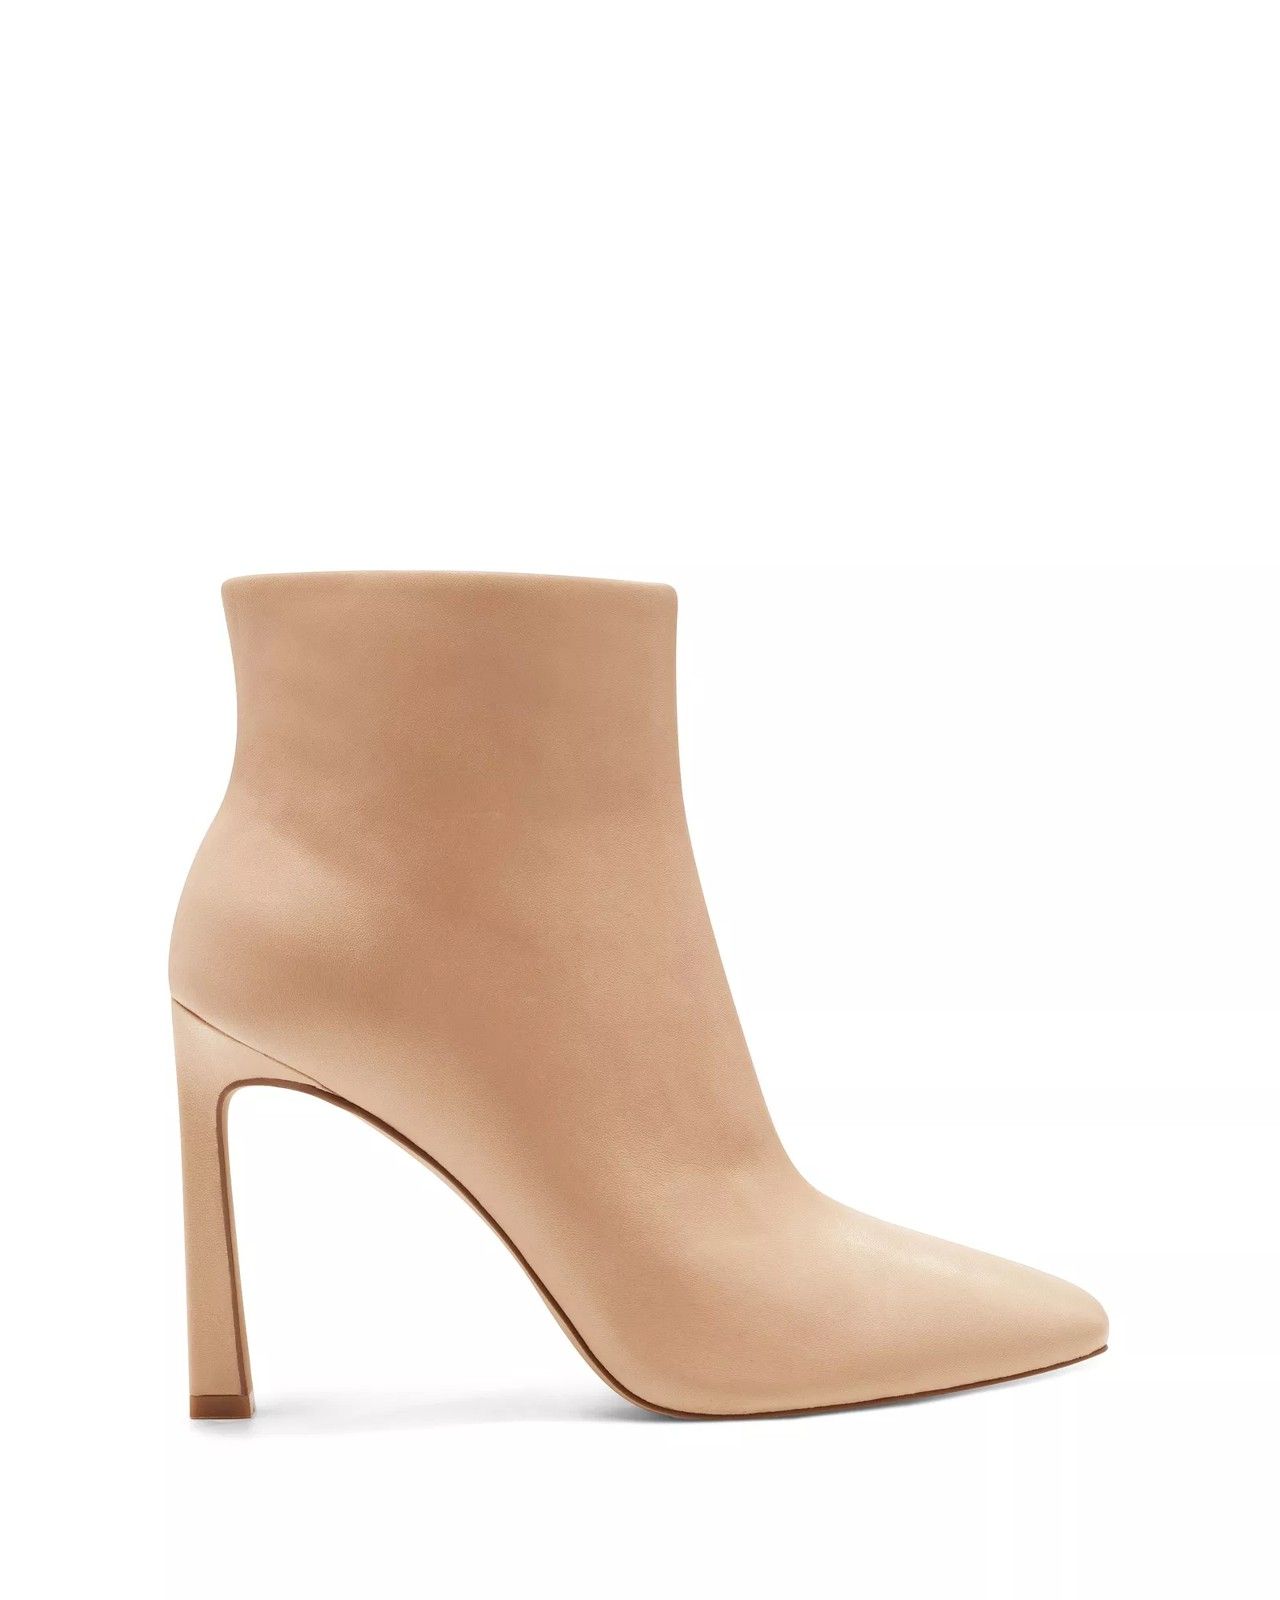 Taileen Heeled Bootie | Vince Camuto